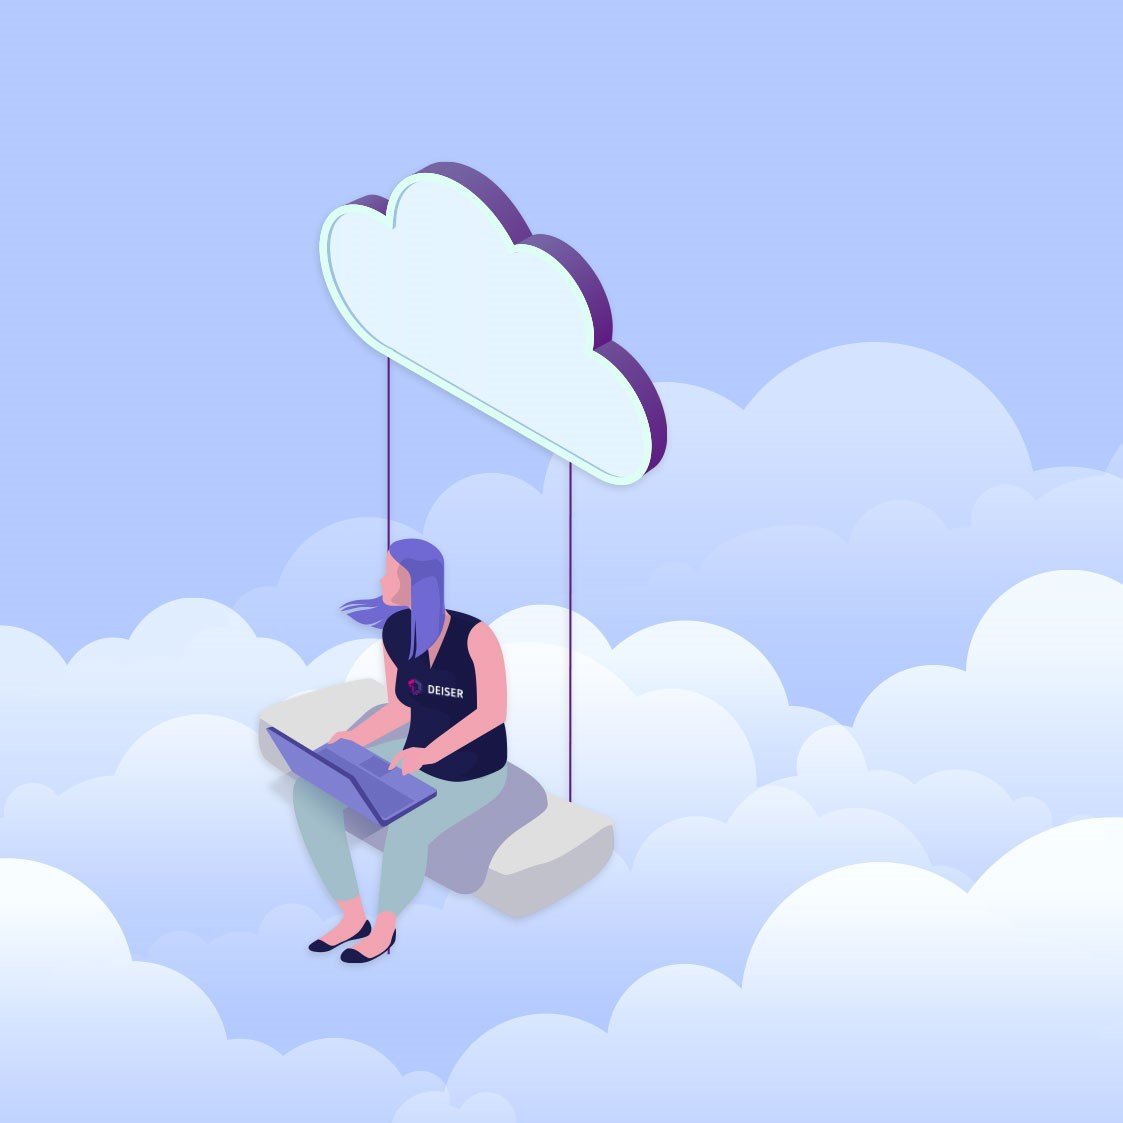 Contact Deiser to migrate to Atlassian Cloud